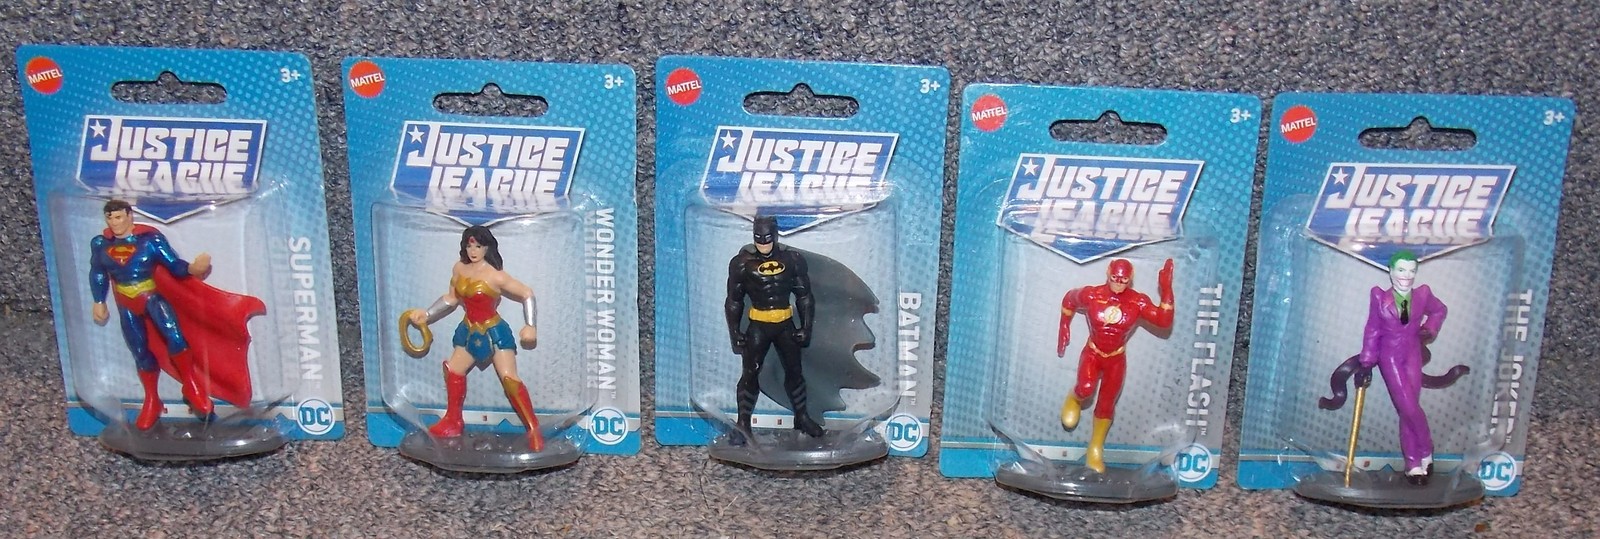 DC Comics Lot Of 5 Justice League Figures or and 50 similar items